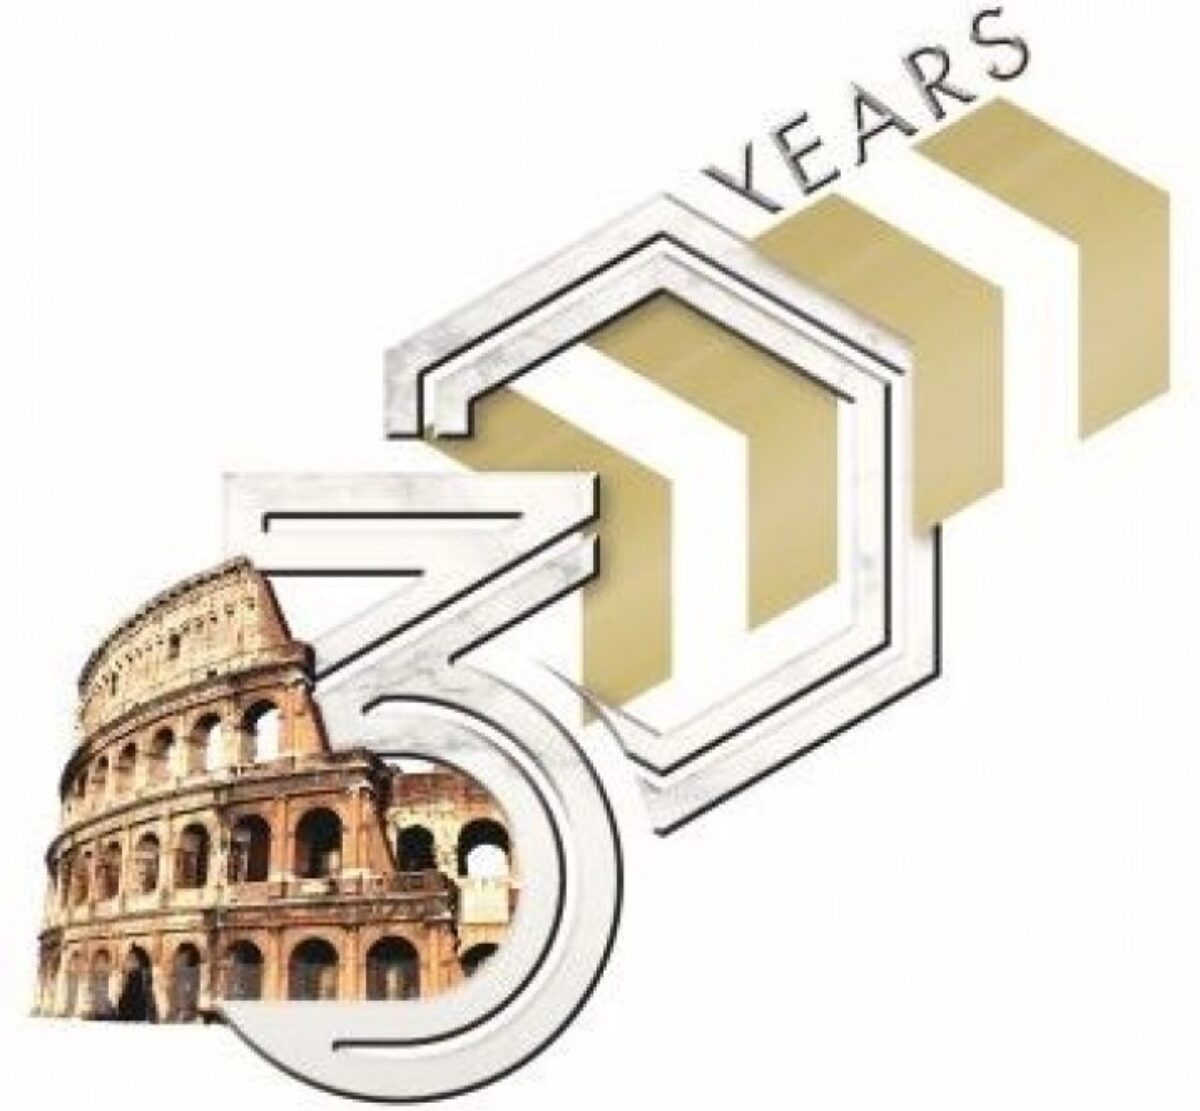 Next Hydraulics Celebrate 30 Years In Business in Rome - Penny Engineering Ltd